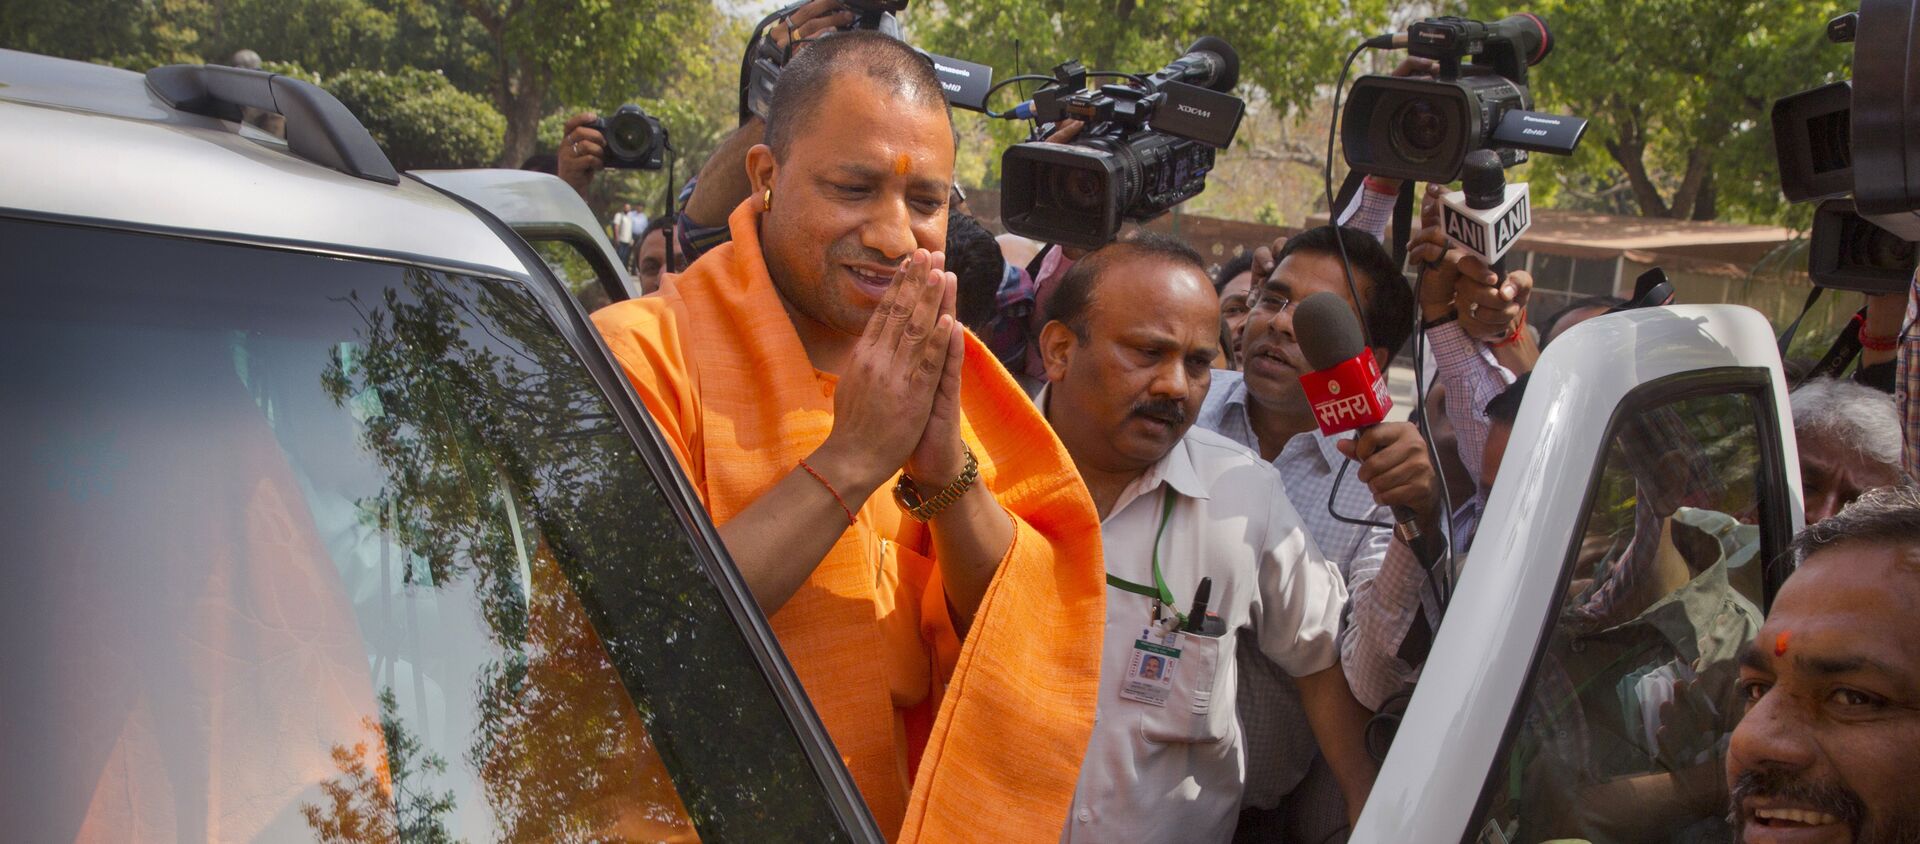 The new Chief Minister of the northern Indian state of Uttar Pradesh Yogi Adityanath greets media as he arrives at the Parliament in New Delhi, India, Tuesday, March 21, 2017 - Sputnik International, 1920, 11.08.2021